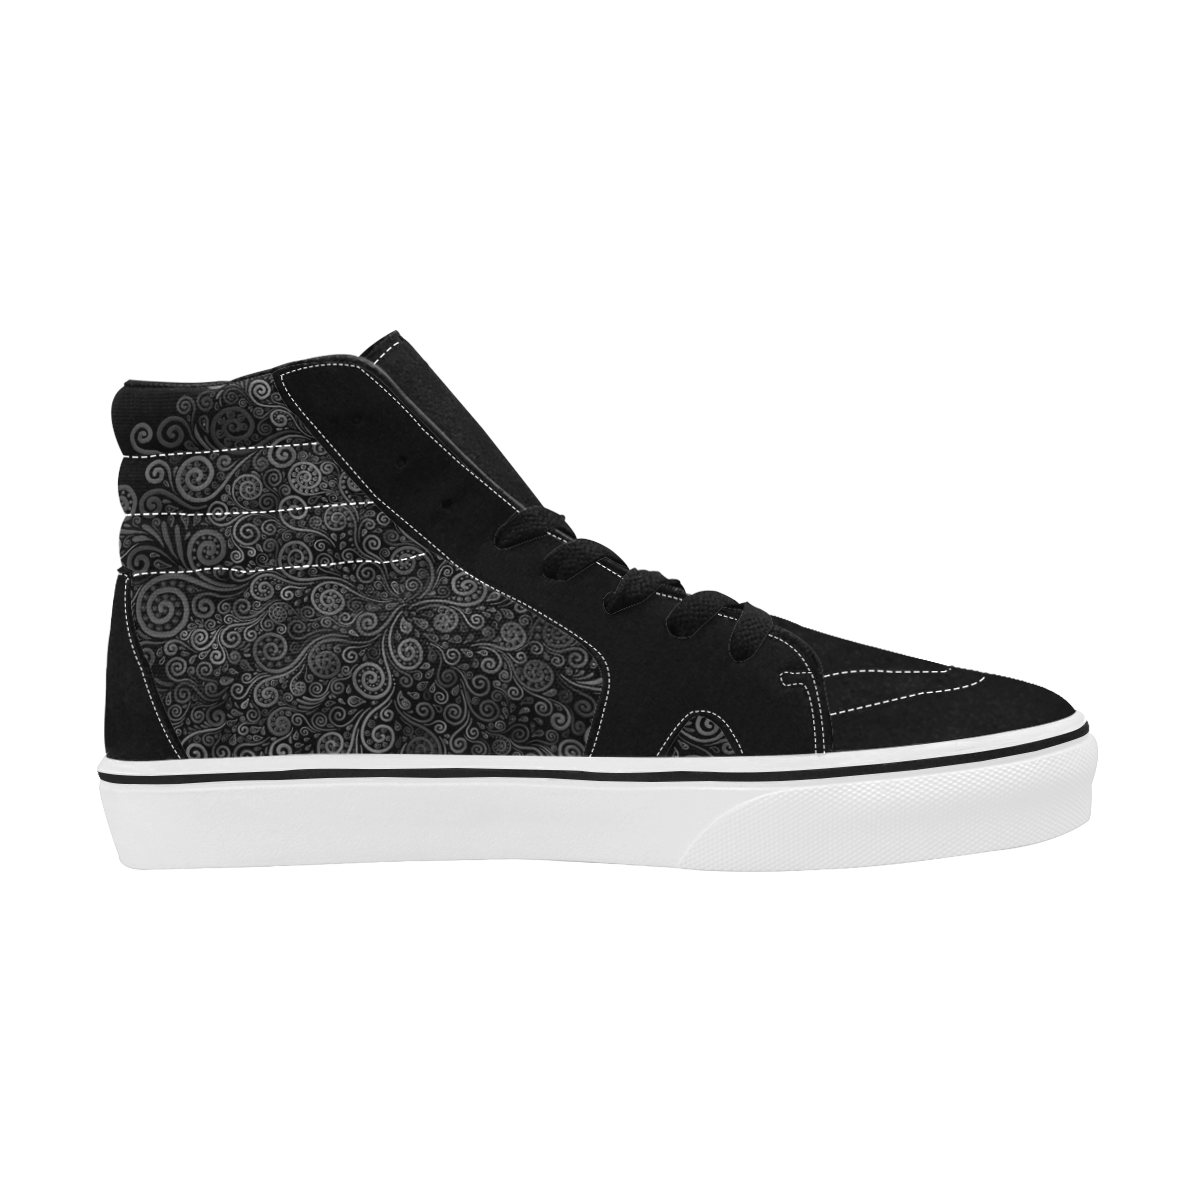 3D Psychedelic Black and White Rose Women's High Top Skateboarding Shoes (Model E001-1)